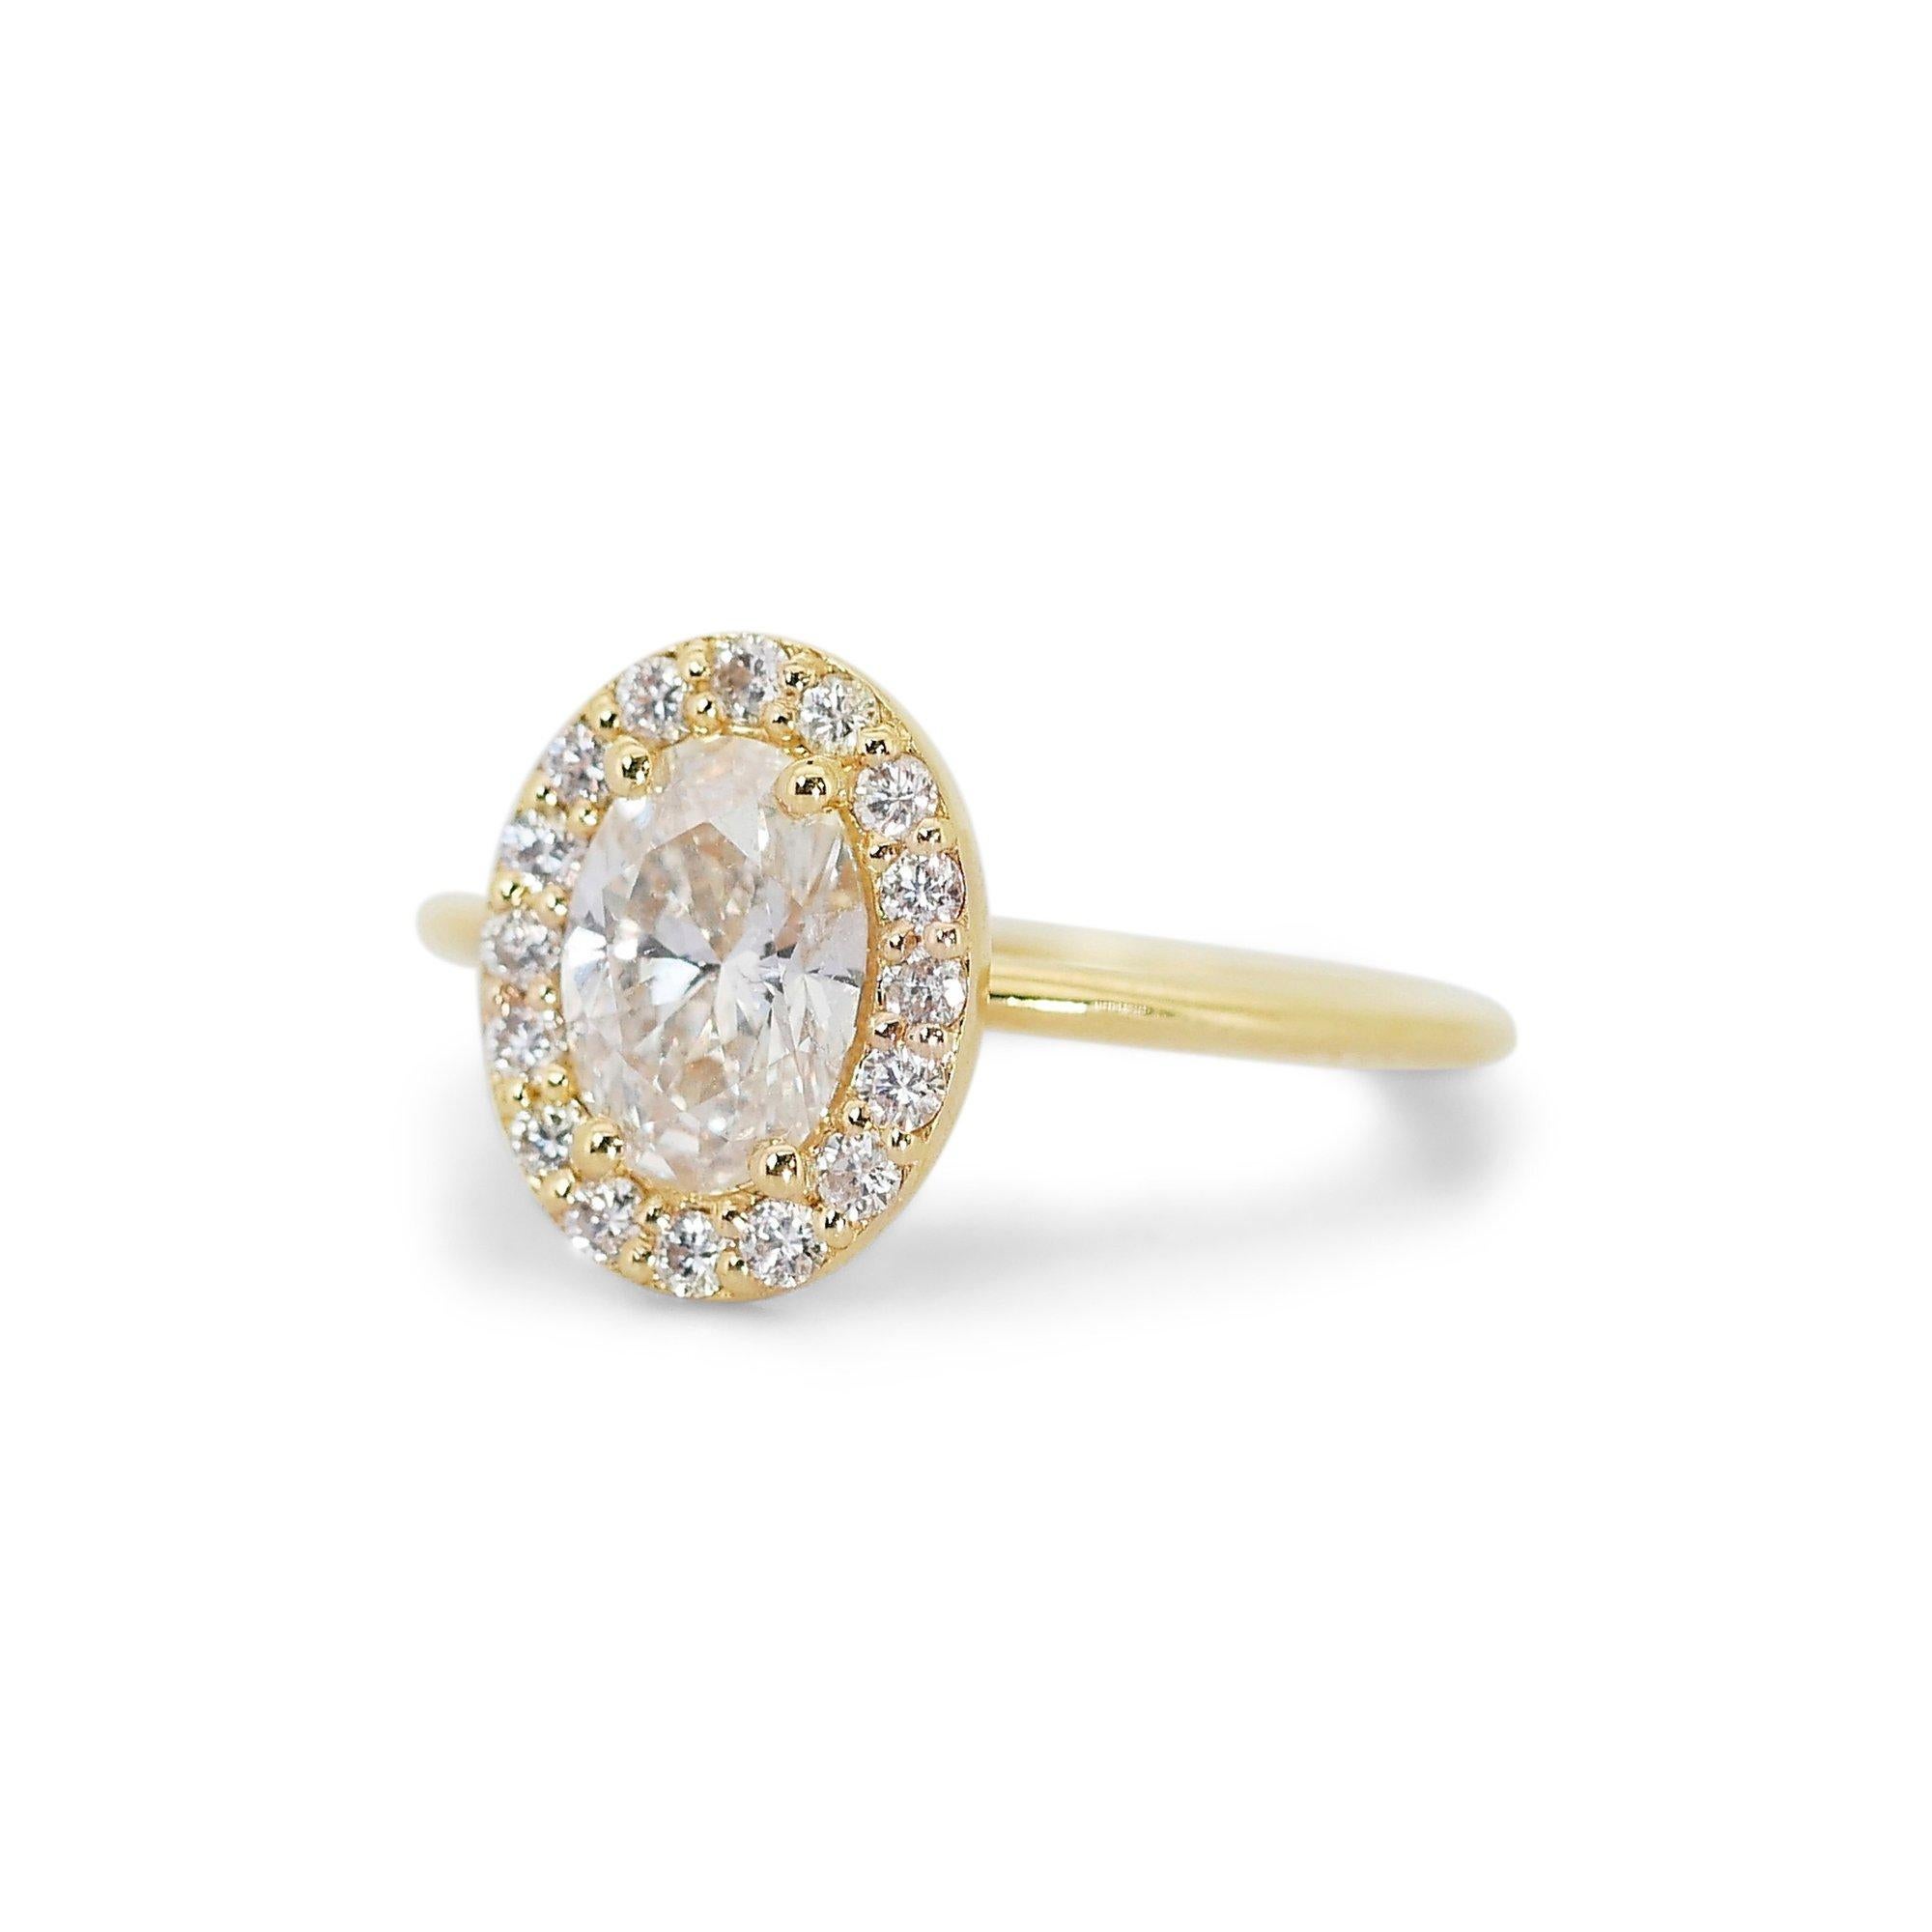 Dazzling 18k Yellow Gold Natural Diamond Halo Ring w/1.23 ct - GIA Certified

Metal: 18k Yellow Gold 

This dazzling diamond halo ring showcases a classic elegance, featuring a stunning 1.00 carat oval diamond as its centerpiece. And 16 stunning